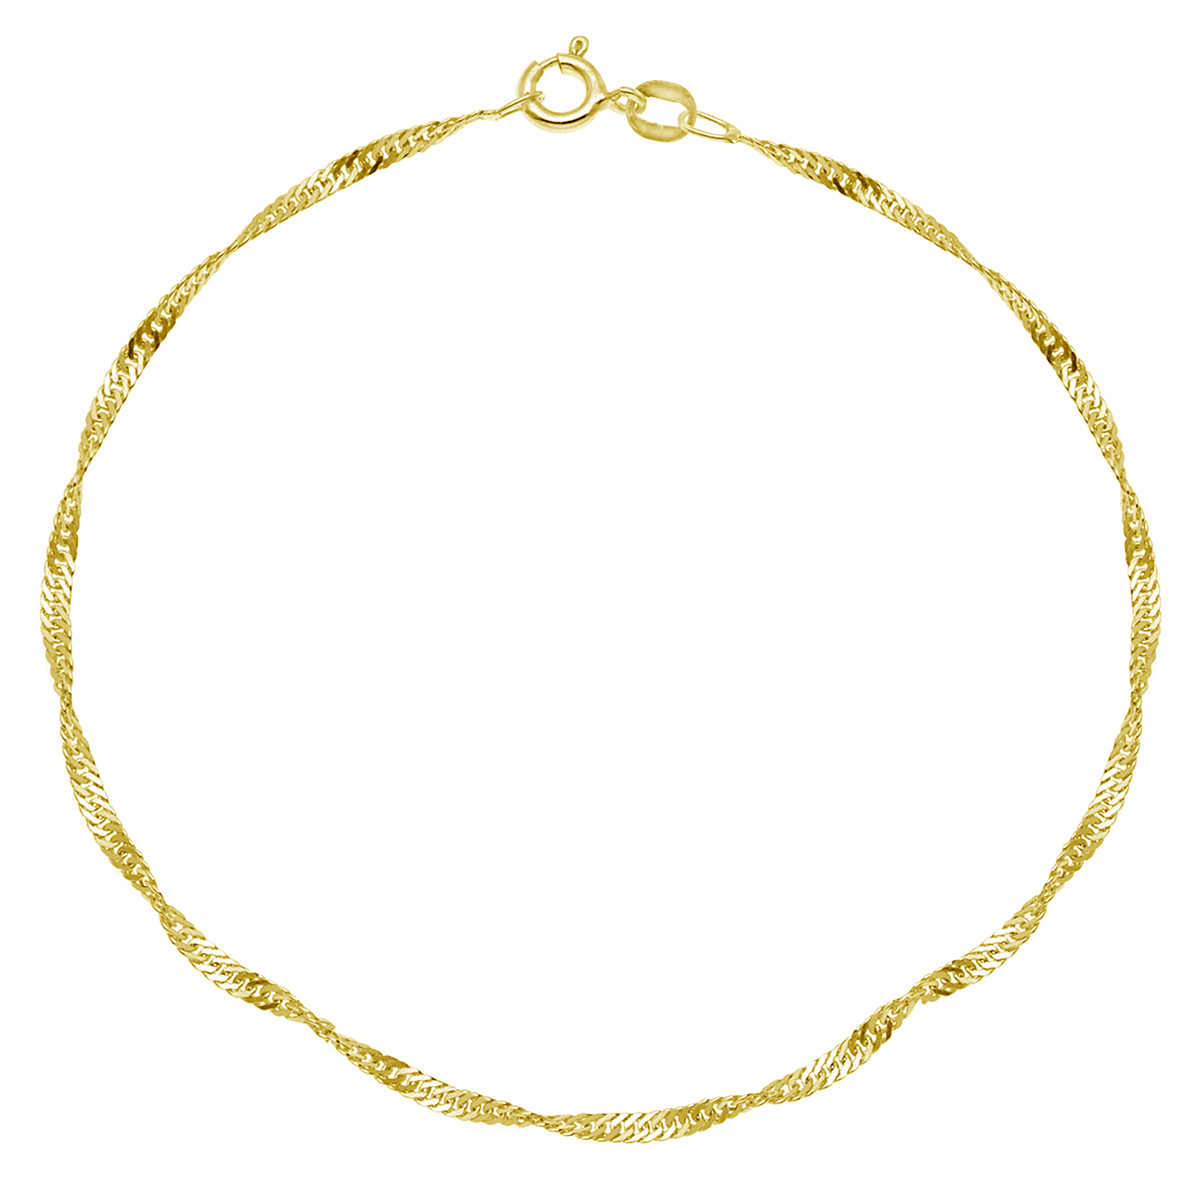 Barefootsies Singapore Ankle Bracelet With Gold Over Sterling